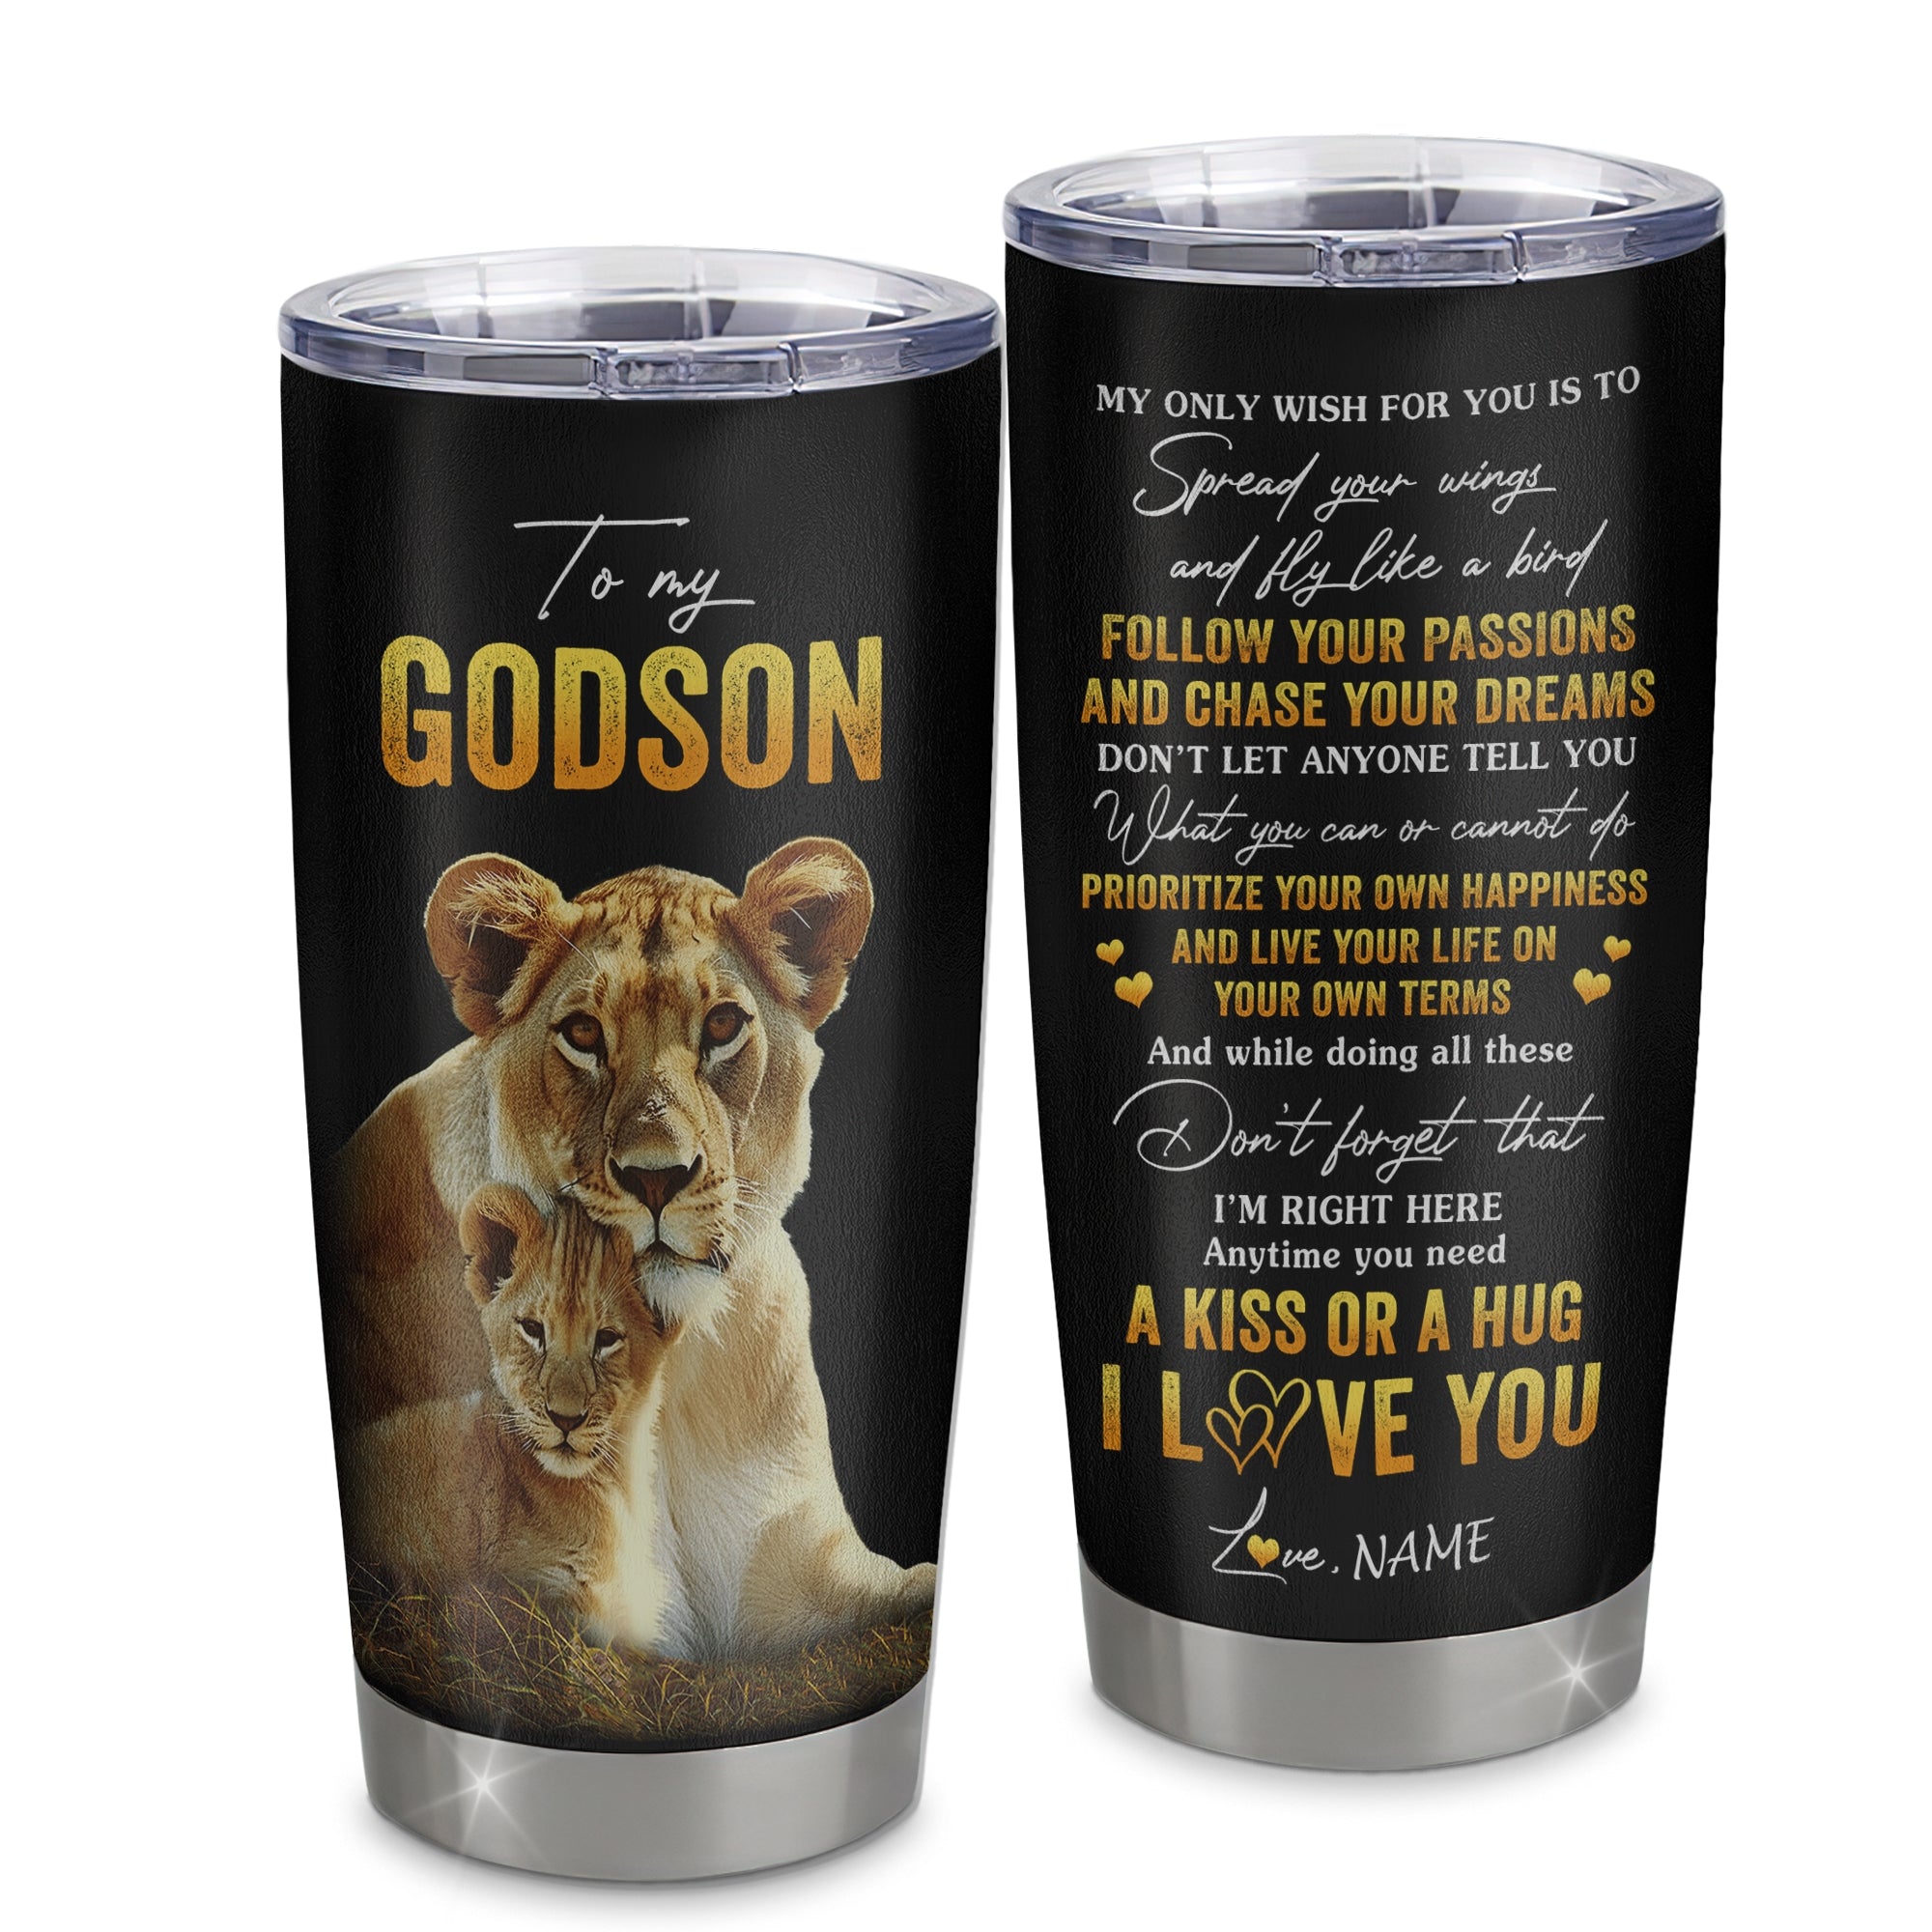 Personalized_To_My_Godson_Tumbler_From_Godmother_Aunty_Stainless_Steel_Cup_Lion_My_Only_Wish_For_You_Godchild_Birthday_Graduation_Christmas_Travel_Mug_Tumbler_mockup_1.jpg